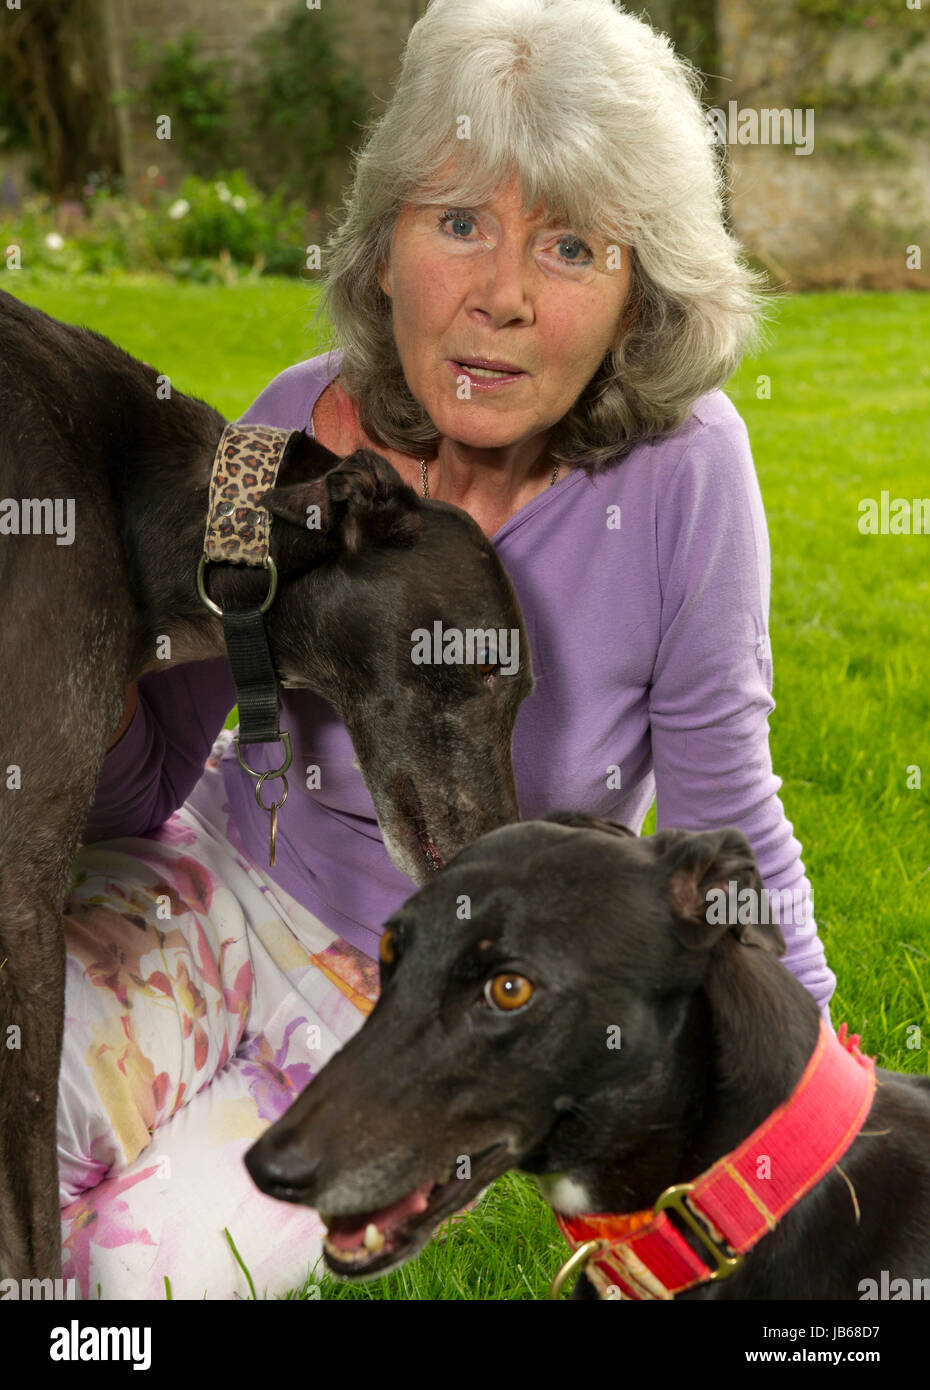 Jilly Cooper at her home in Gloucestershire with greyhounds 'bluebell' (red collar) and 'Feather', showing her pets cemetary and a wall of photographs Stock Photo